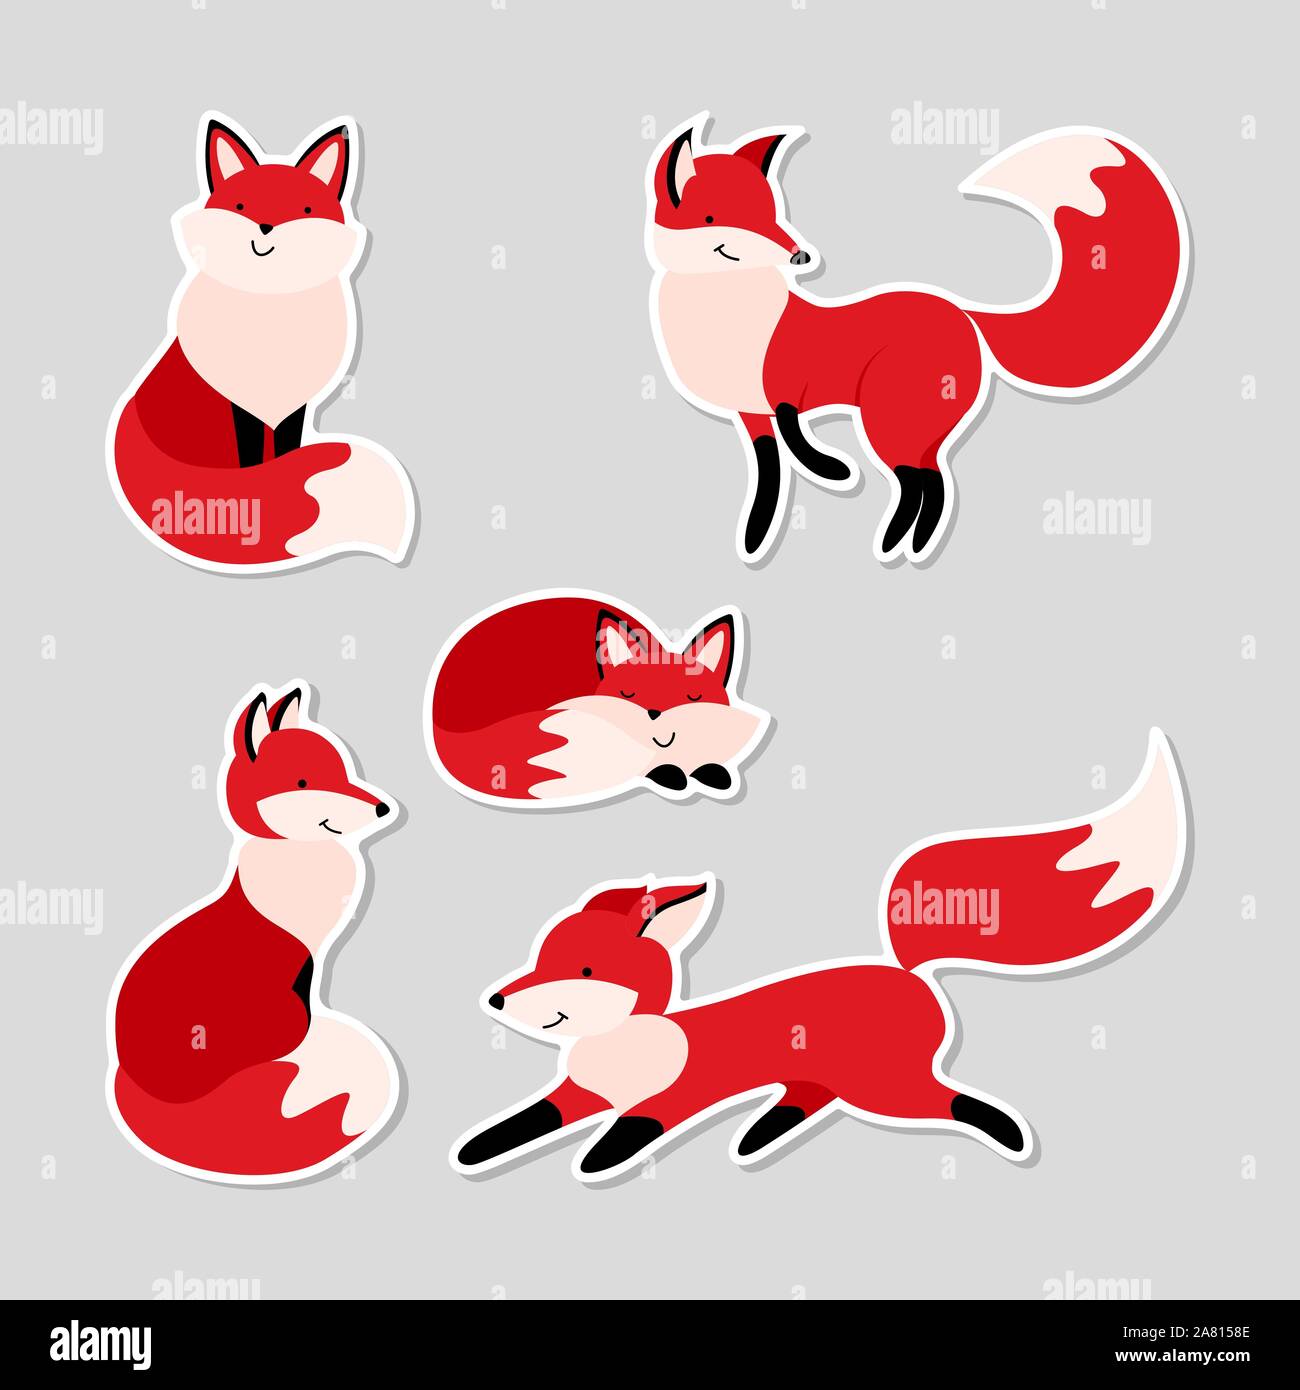 Set of stickers with cute cartoon foxes. Funny woodland animals in different situations. Flat vector illustration. Stock Vector